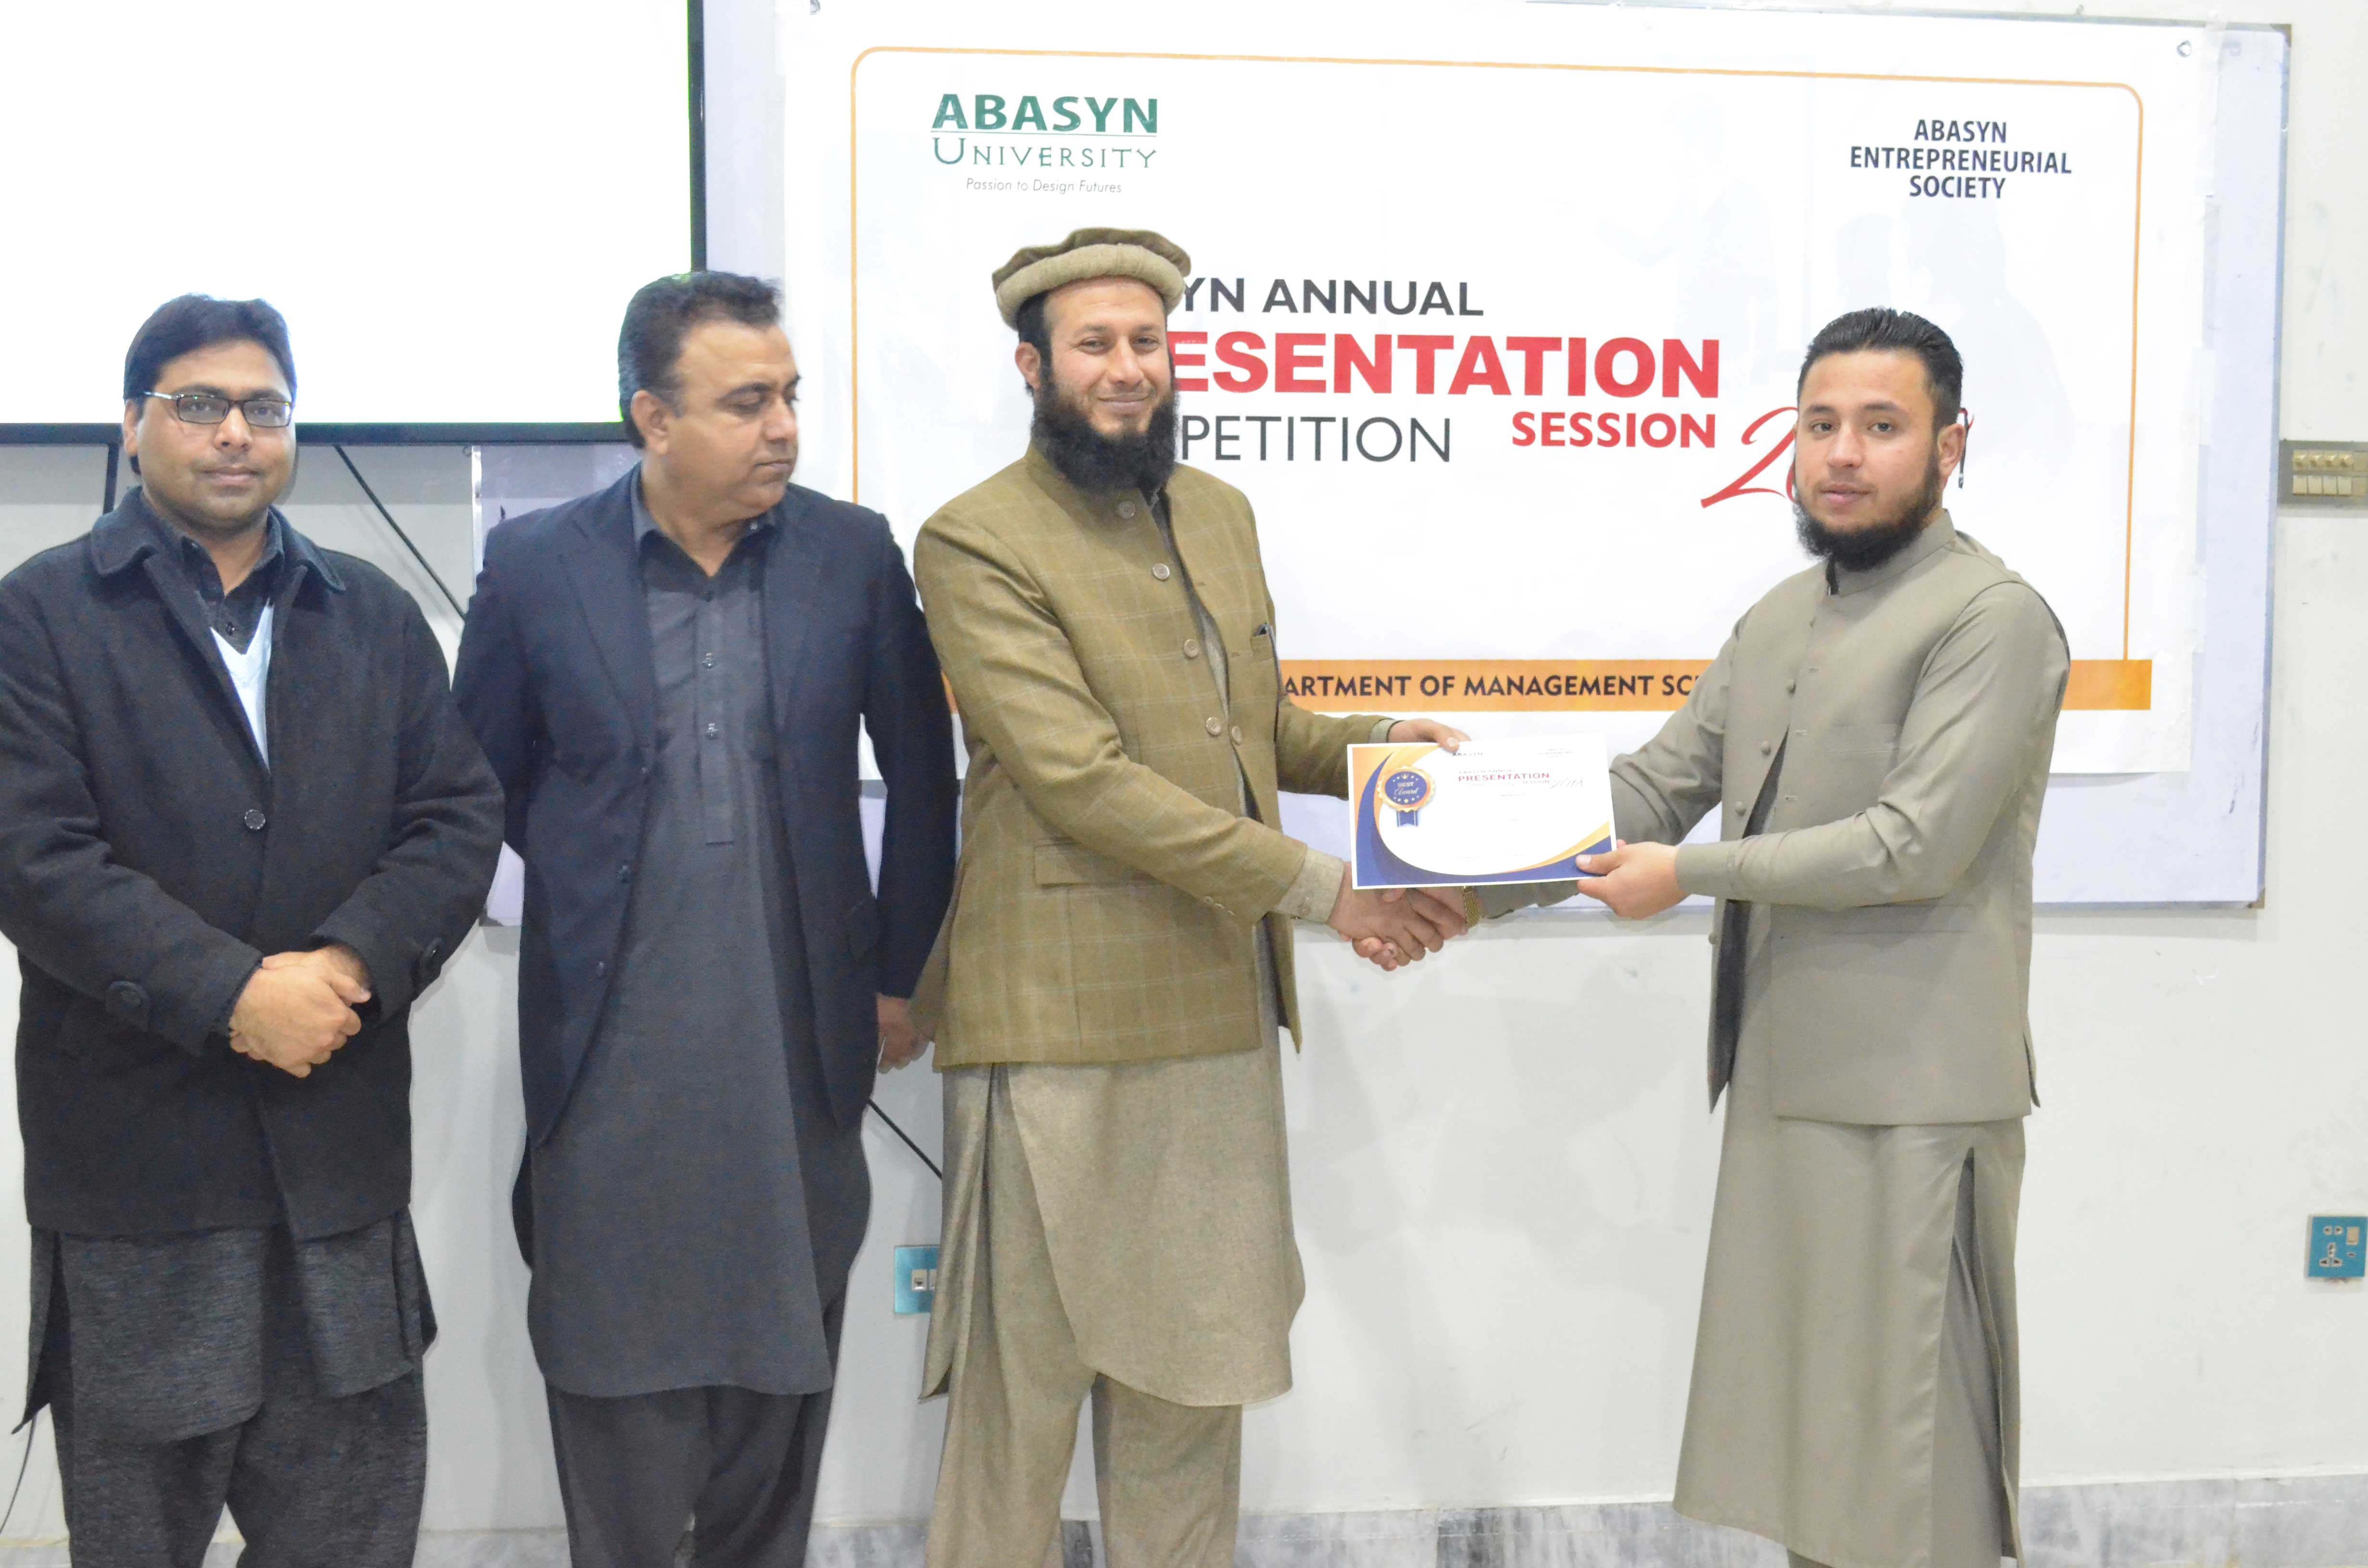 Abasyn Annual Presentation competition 2018 